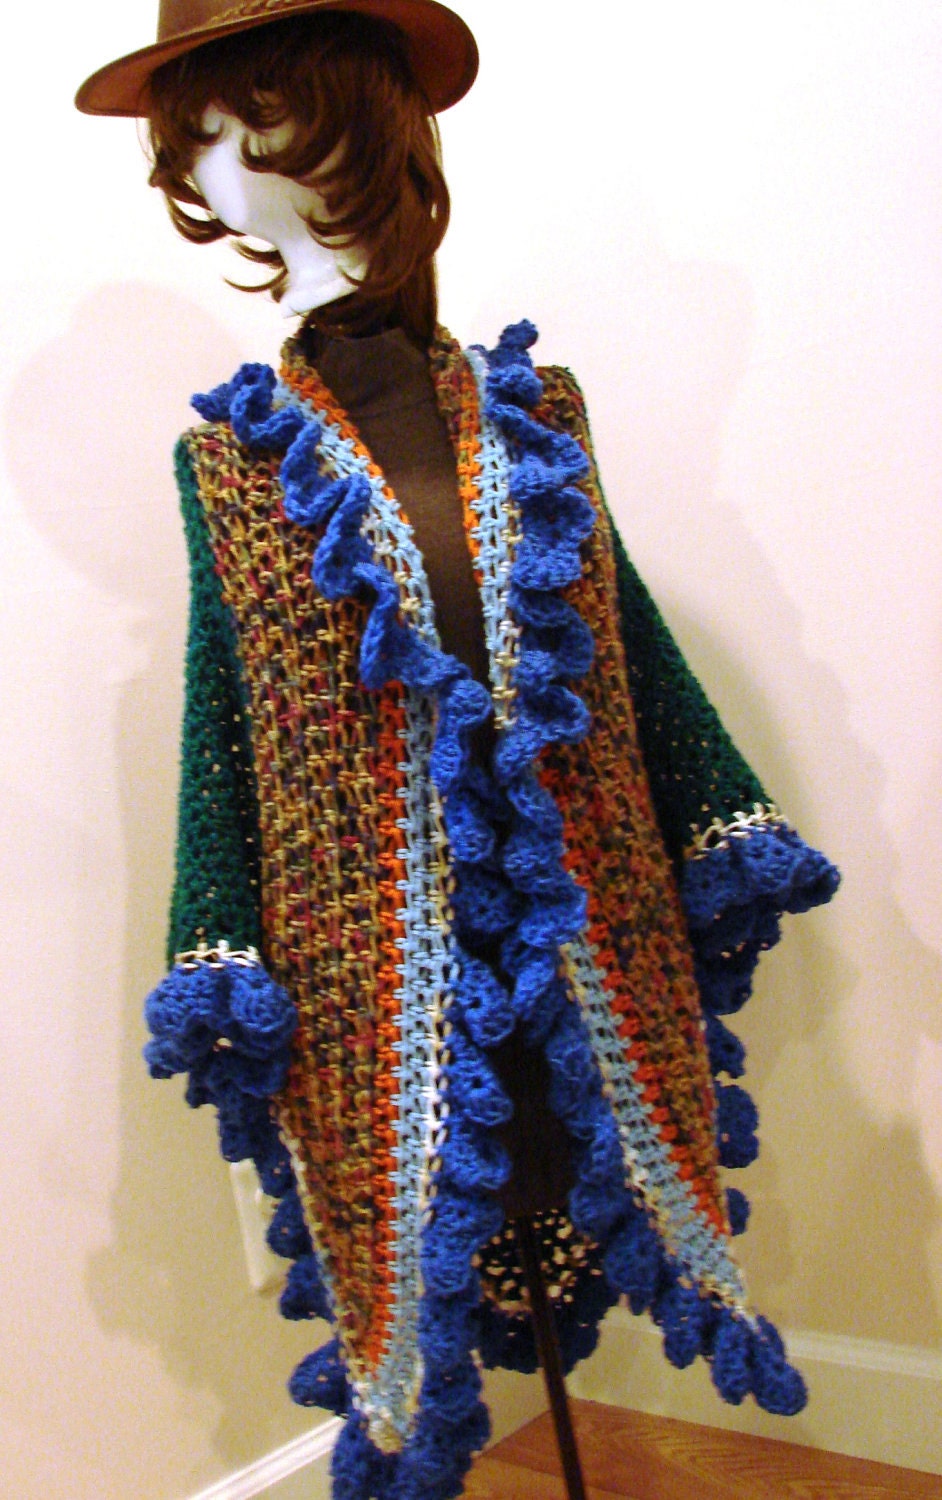 Bohemian Style Wrap Shawl Green with Mix and Blue Ruffle - Adjusts One Size Fits Most - CherokeeDreams